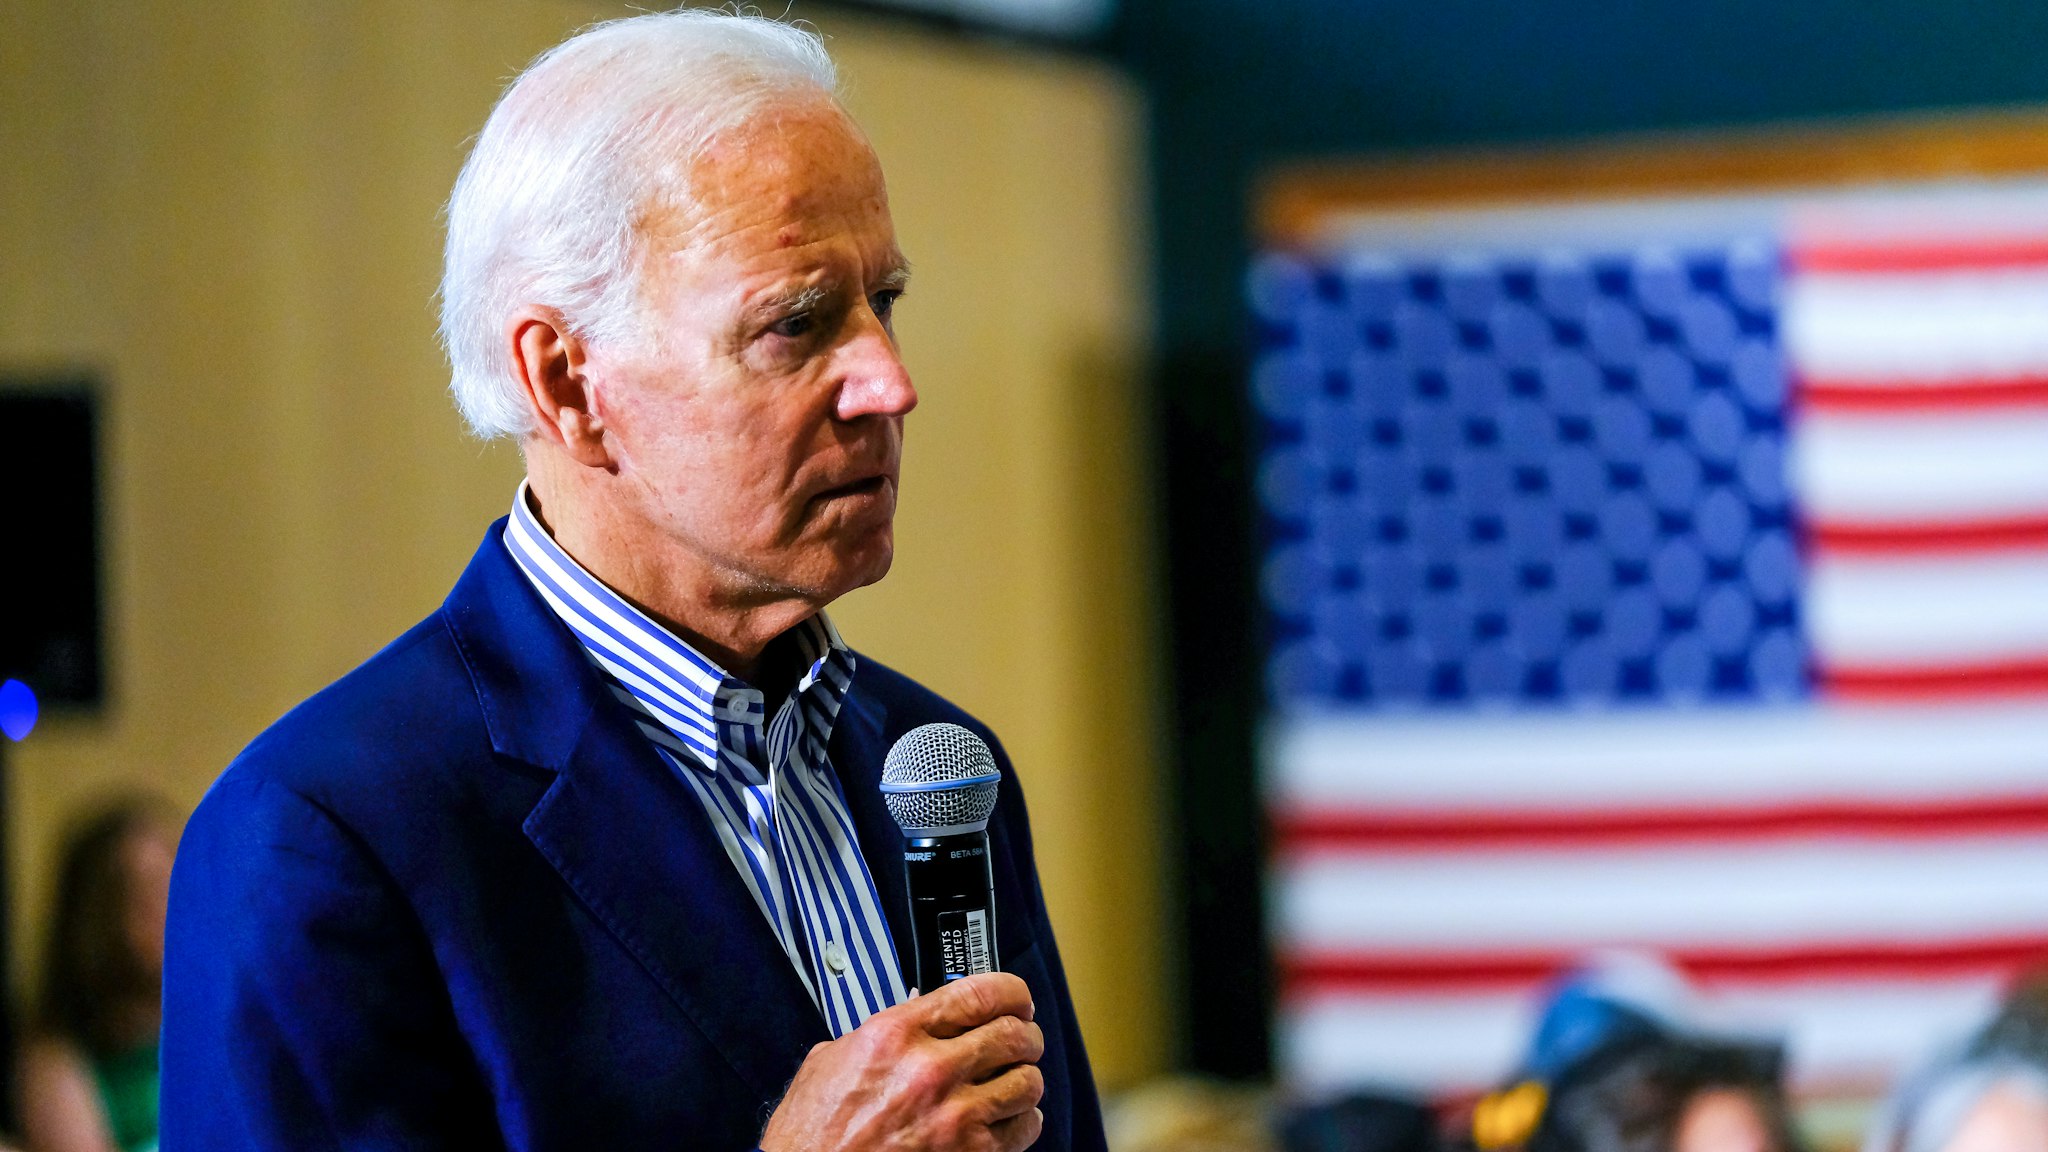 HANOVER, NEW HAMPSHIRE, UNITED STATES - 2019/08/23: Former Vice President Joe Biden speaks during a campaign stop at Dartmouth University in Hanover, New Hampshire.